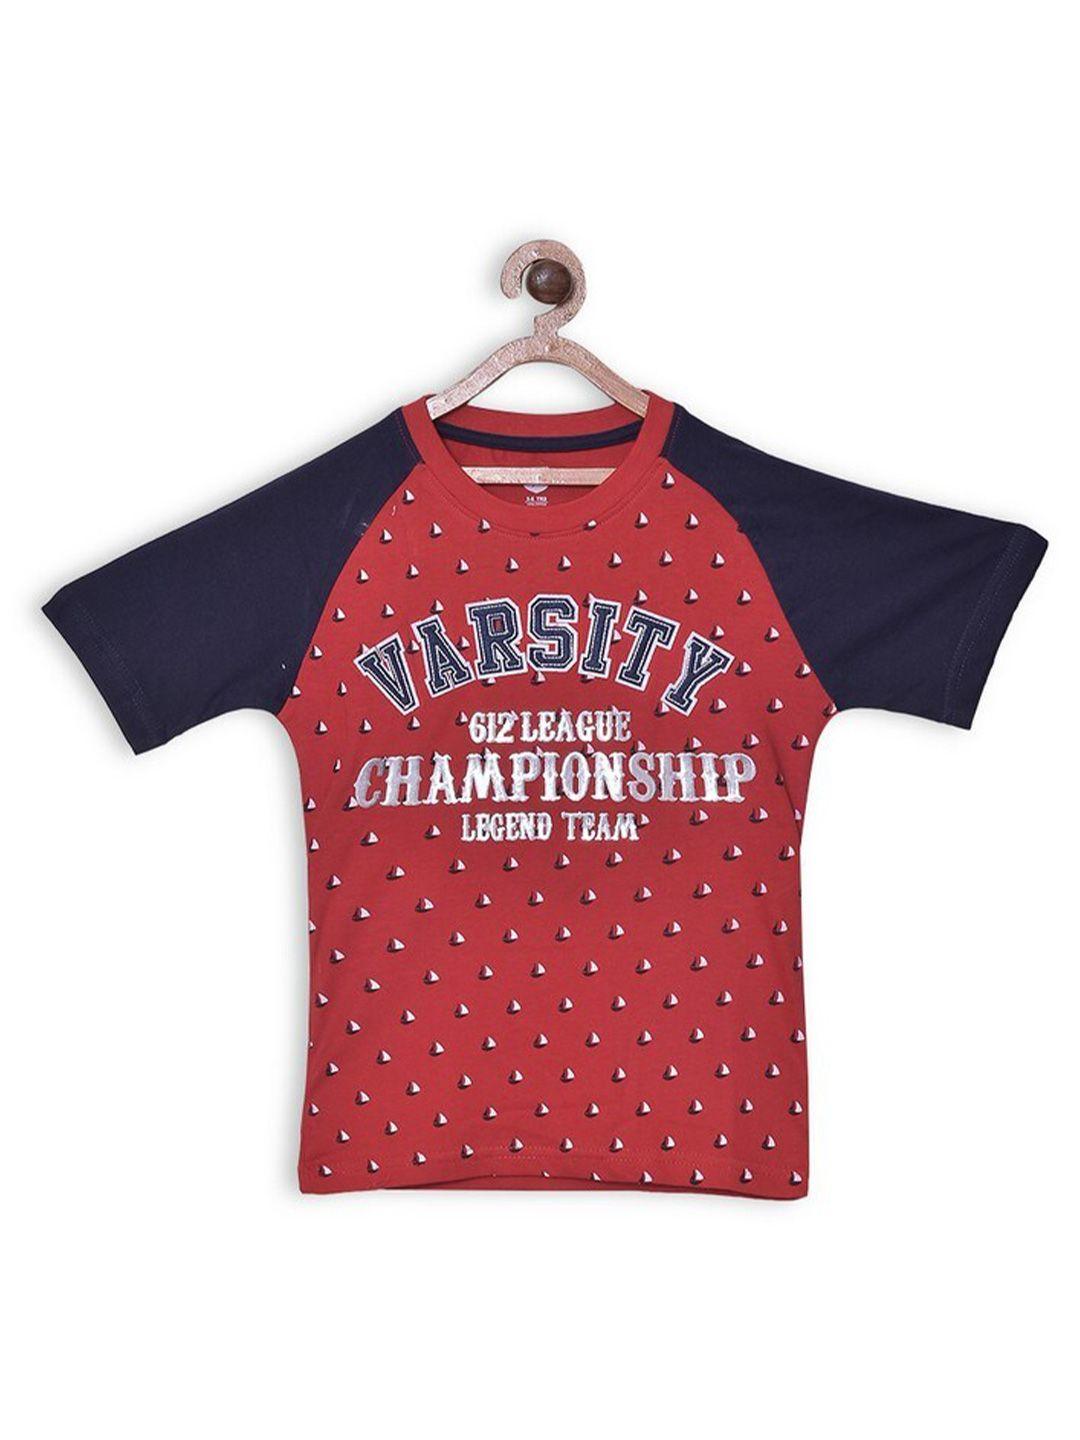 612league boys red & blue typography printed t-shirt